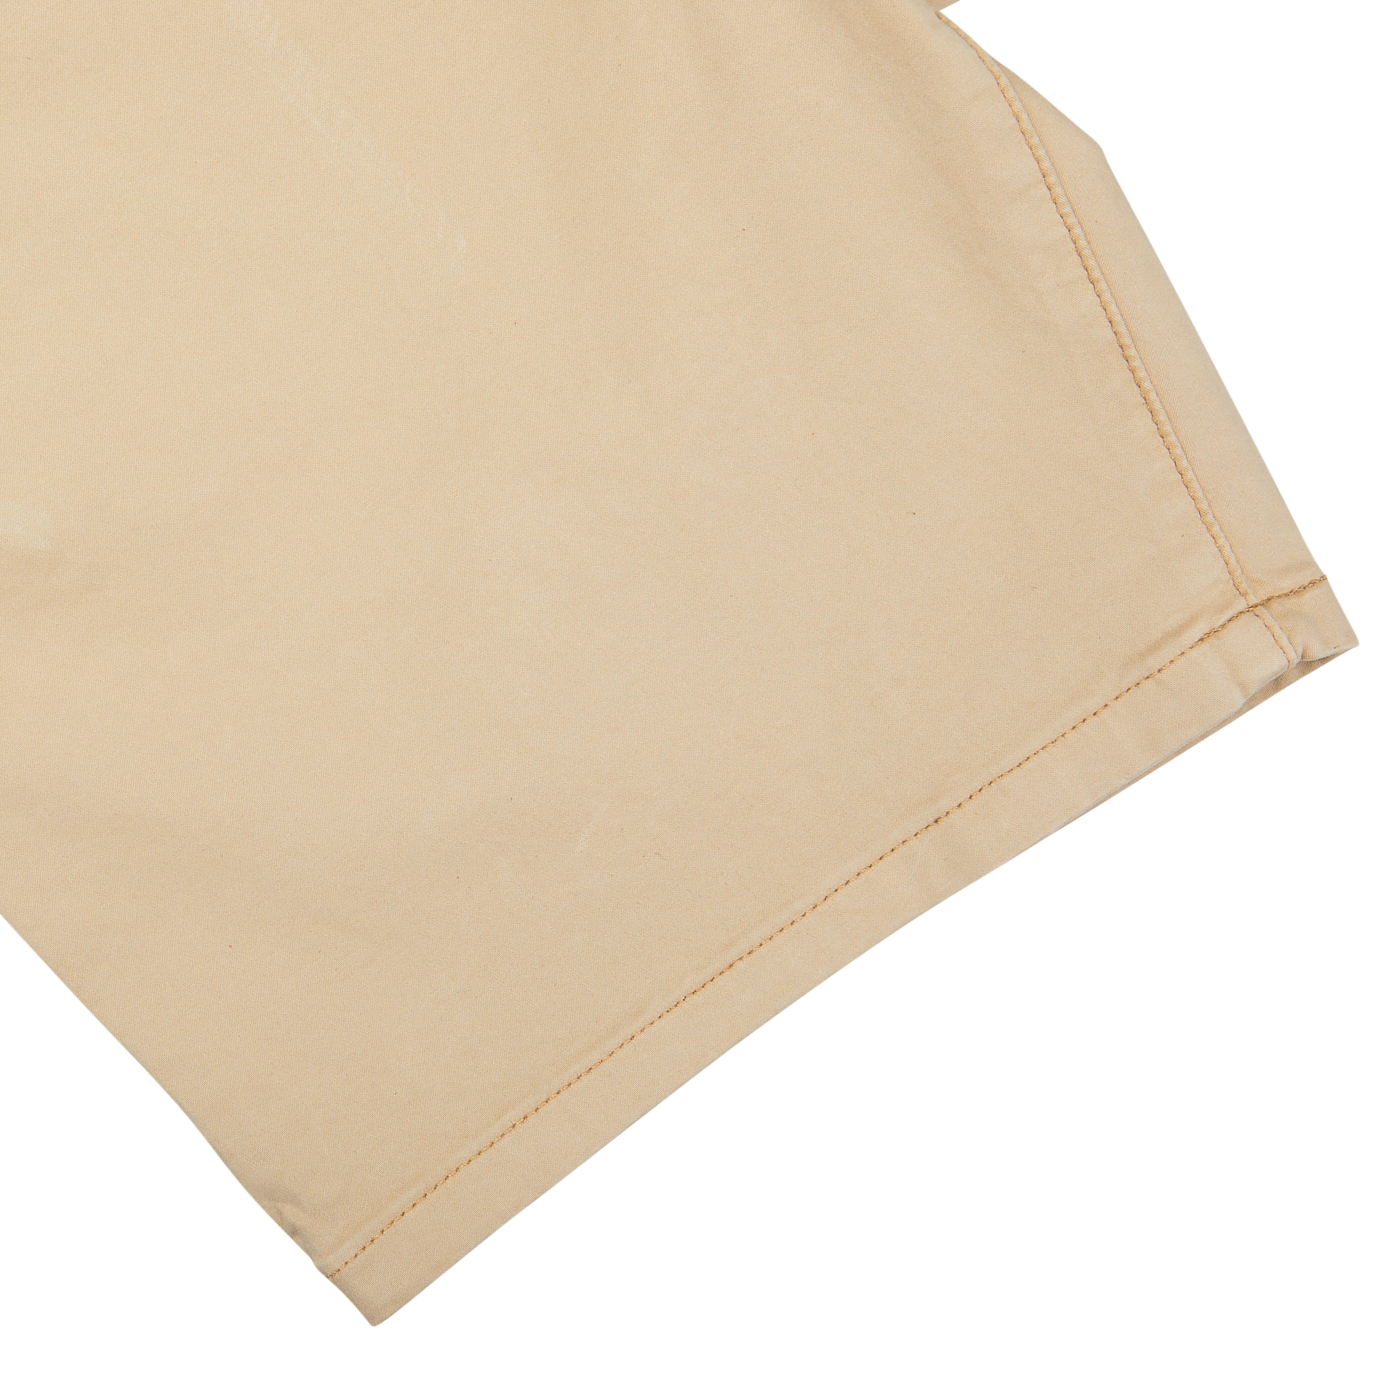 Khaki Beige Cotton Blend Paige Shorts with a neatly stitched hem on a white background.